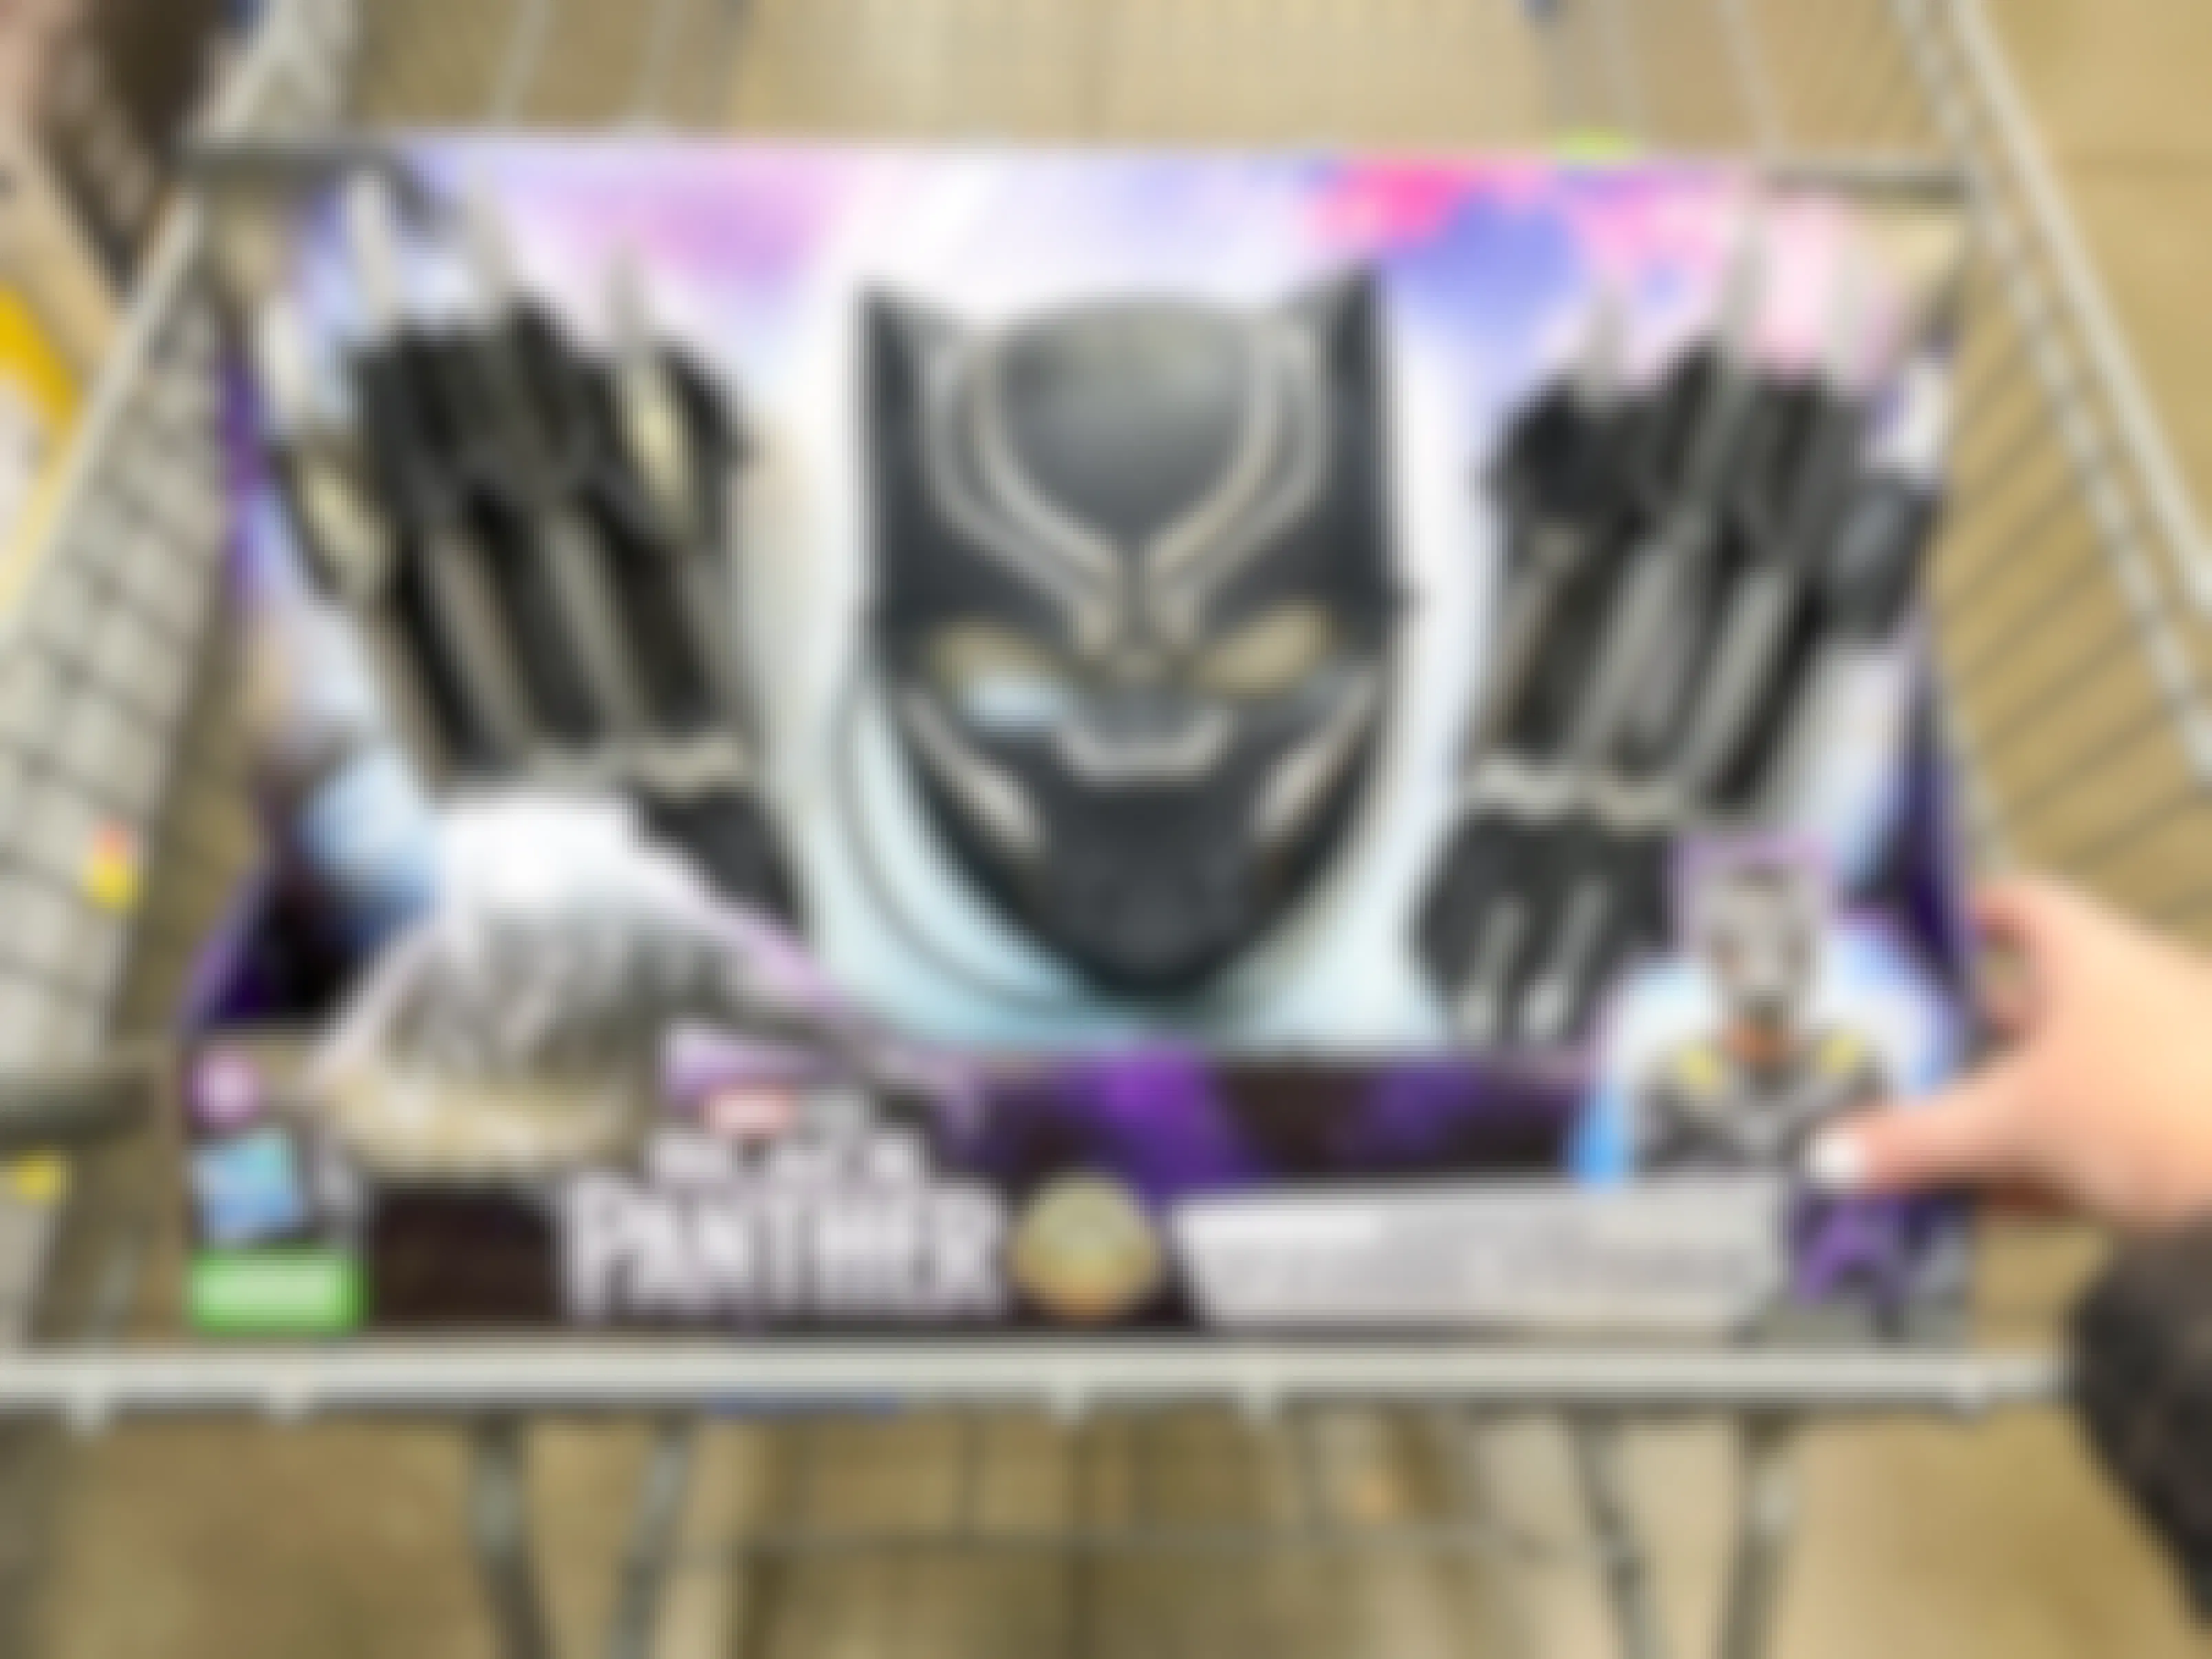 A Black Panther mask and claws set in a Walmart shopping cart